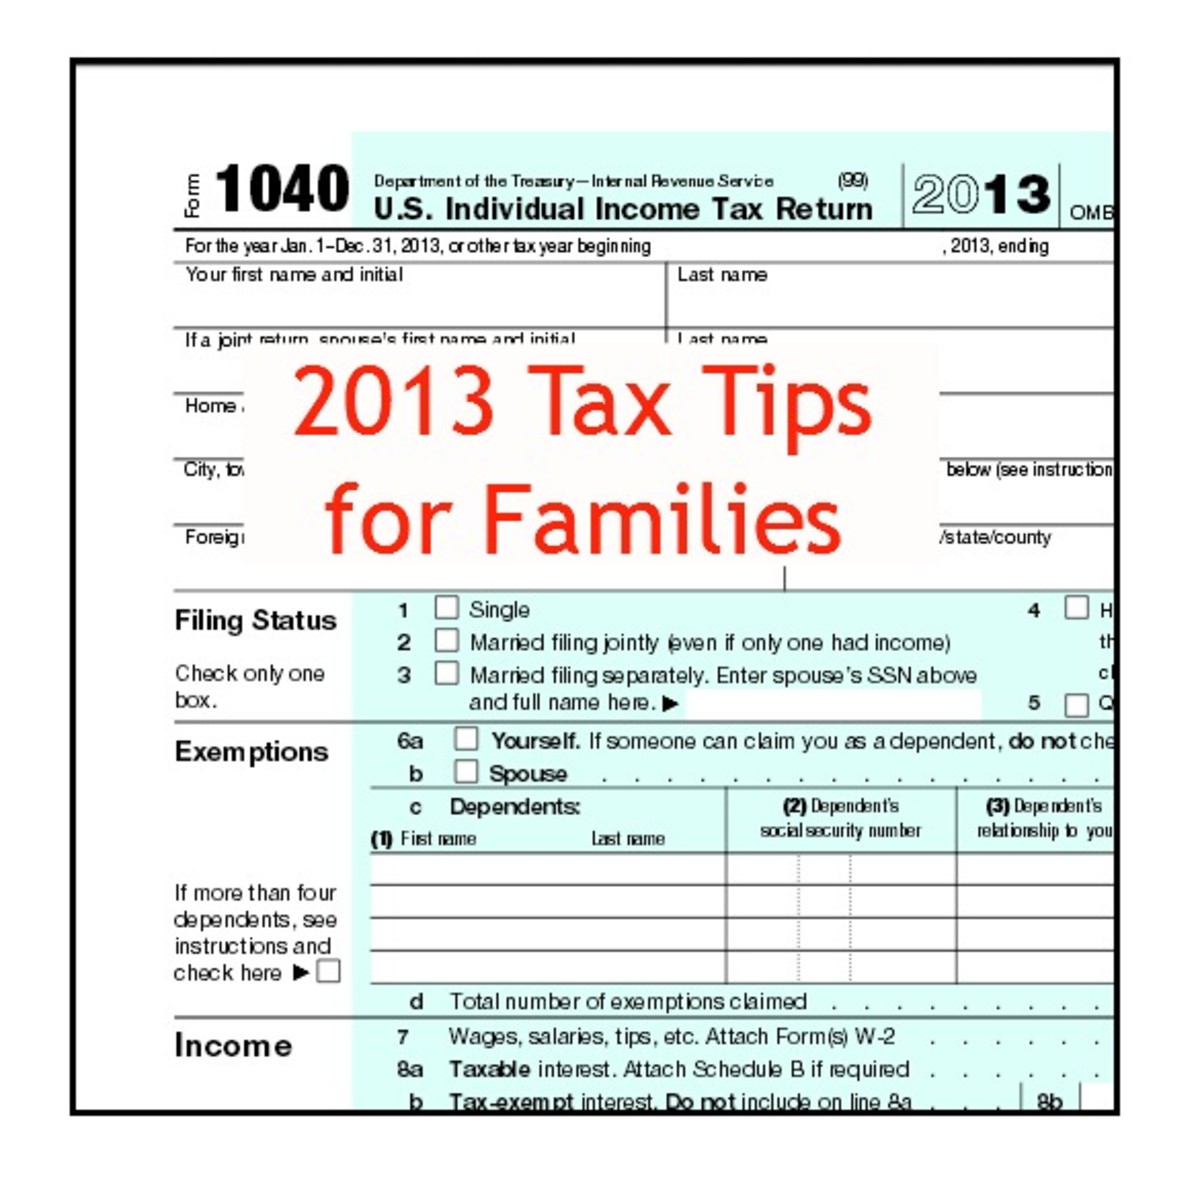 2013 Tax Tips for Families